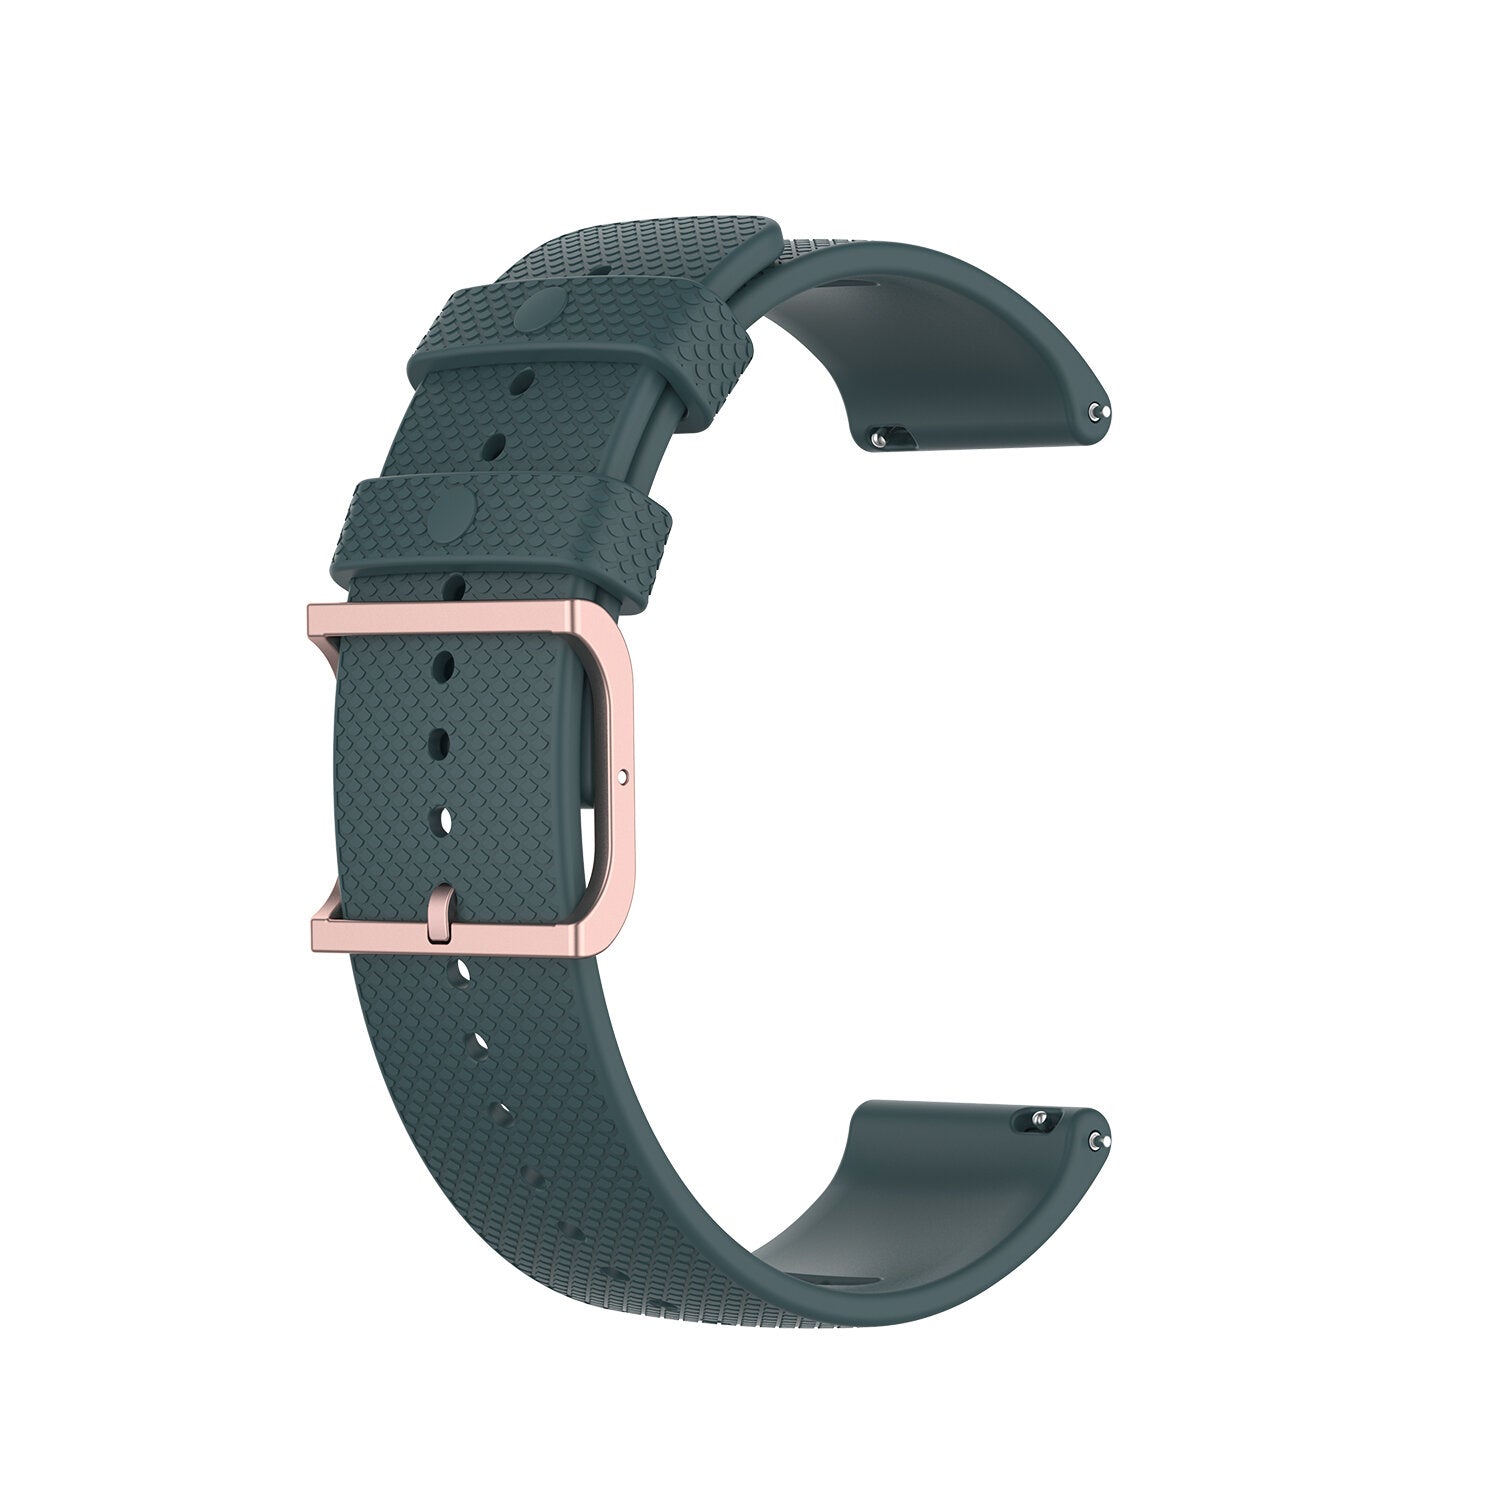 20mm Dot Pattern Silicone Smart Watch Band Replacement Strap